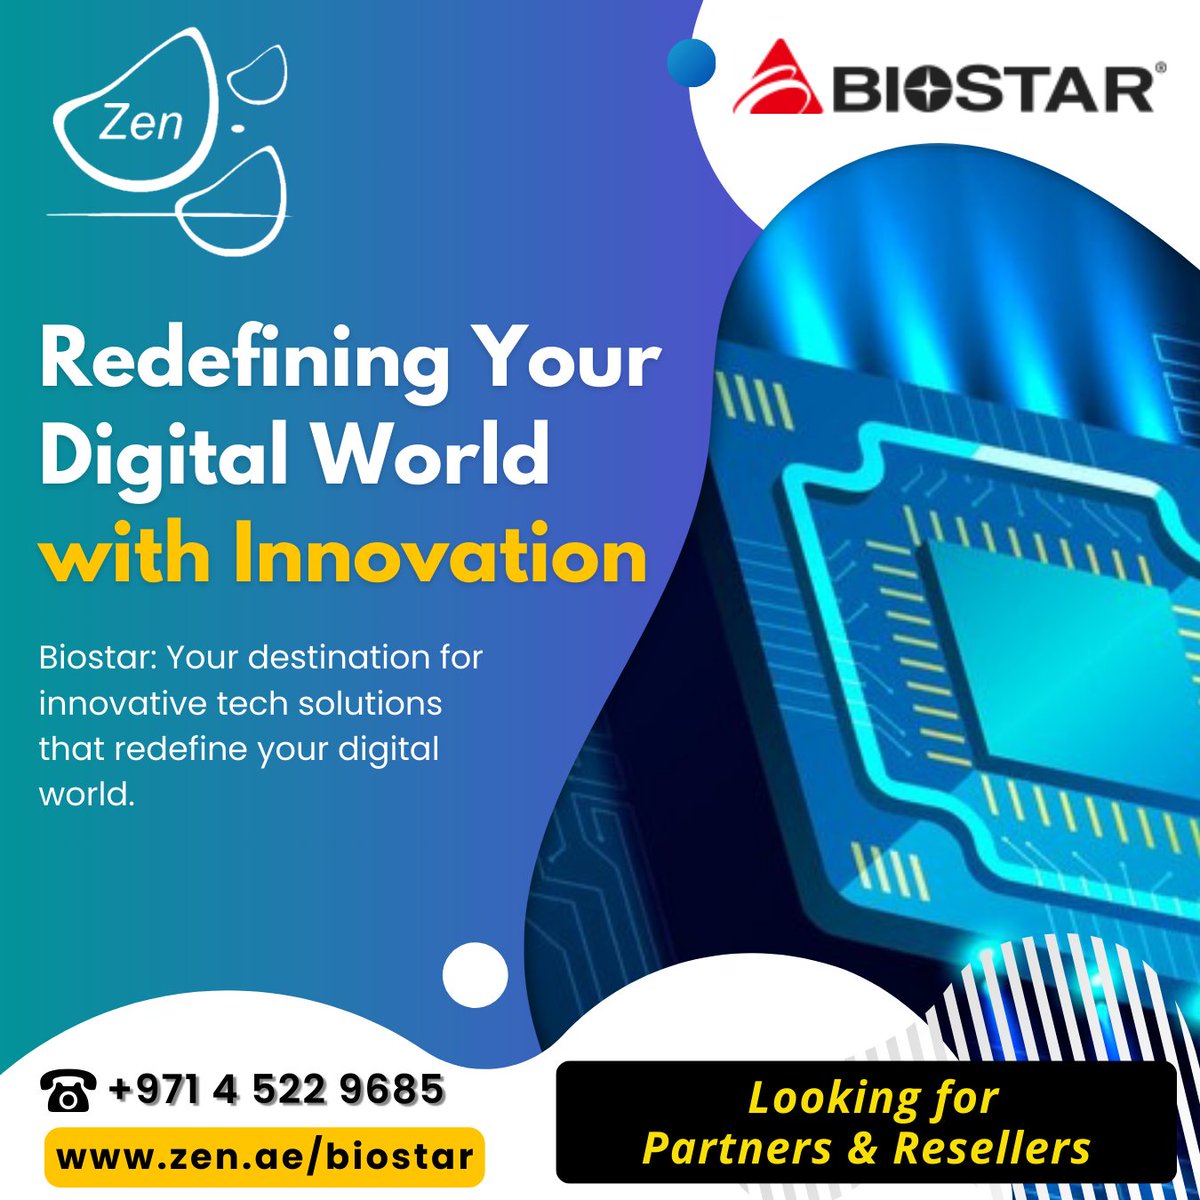 #biostar Experience the future of tech with a wide range of innovative products from Biostar.
Looking for partners & resellers.

smpl.is/8kw65

#3cx #zenitdxb #zenit #businesscommunication #dubaistartup #3cxhosting #simhosting #saudistartups